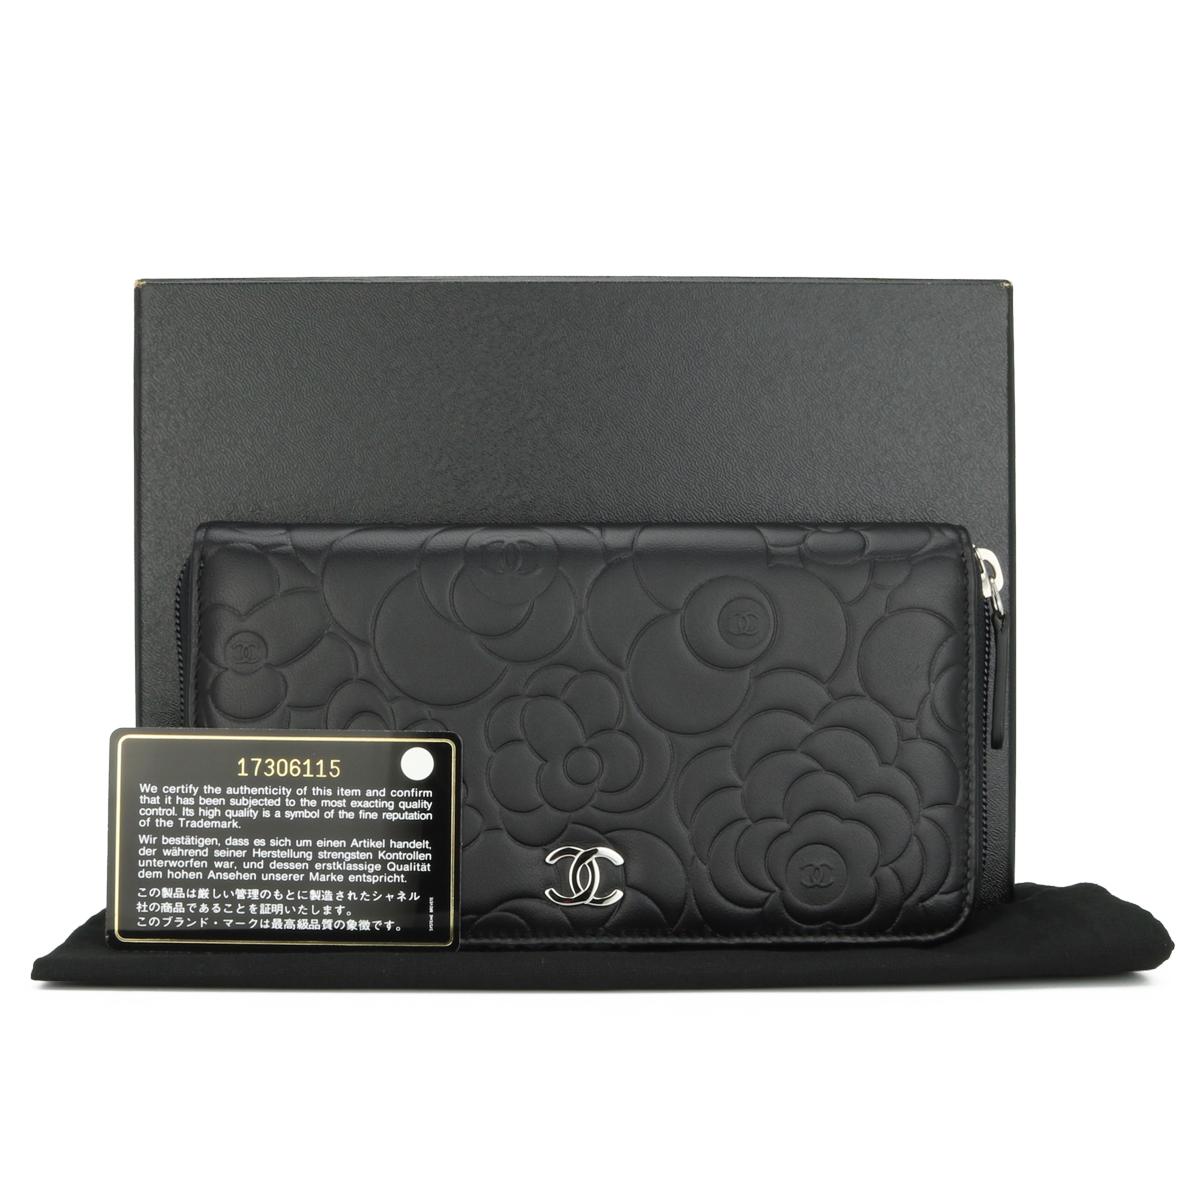 CHANEL Camellia Long Zipped Wallet in Black Lambskin with Silver Hardware 2013.

This stunning zip wallet is in never worn condition; the wallet still holds its original shape, and the hardware is still very shiny. It is such a gorgeous, functional,